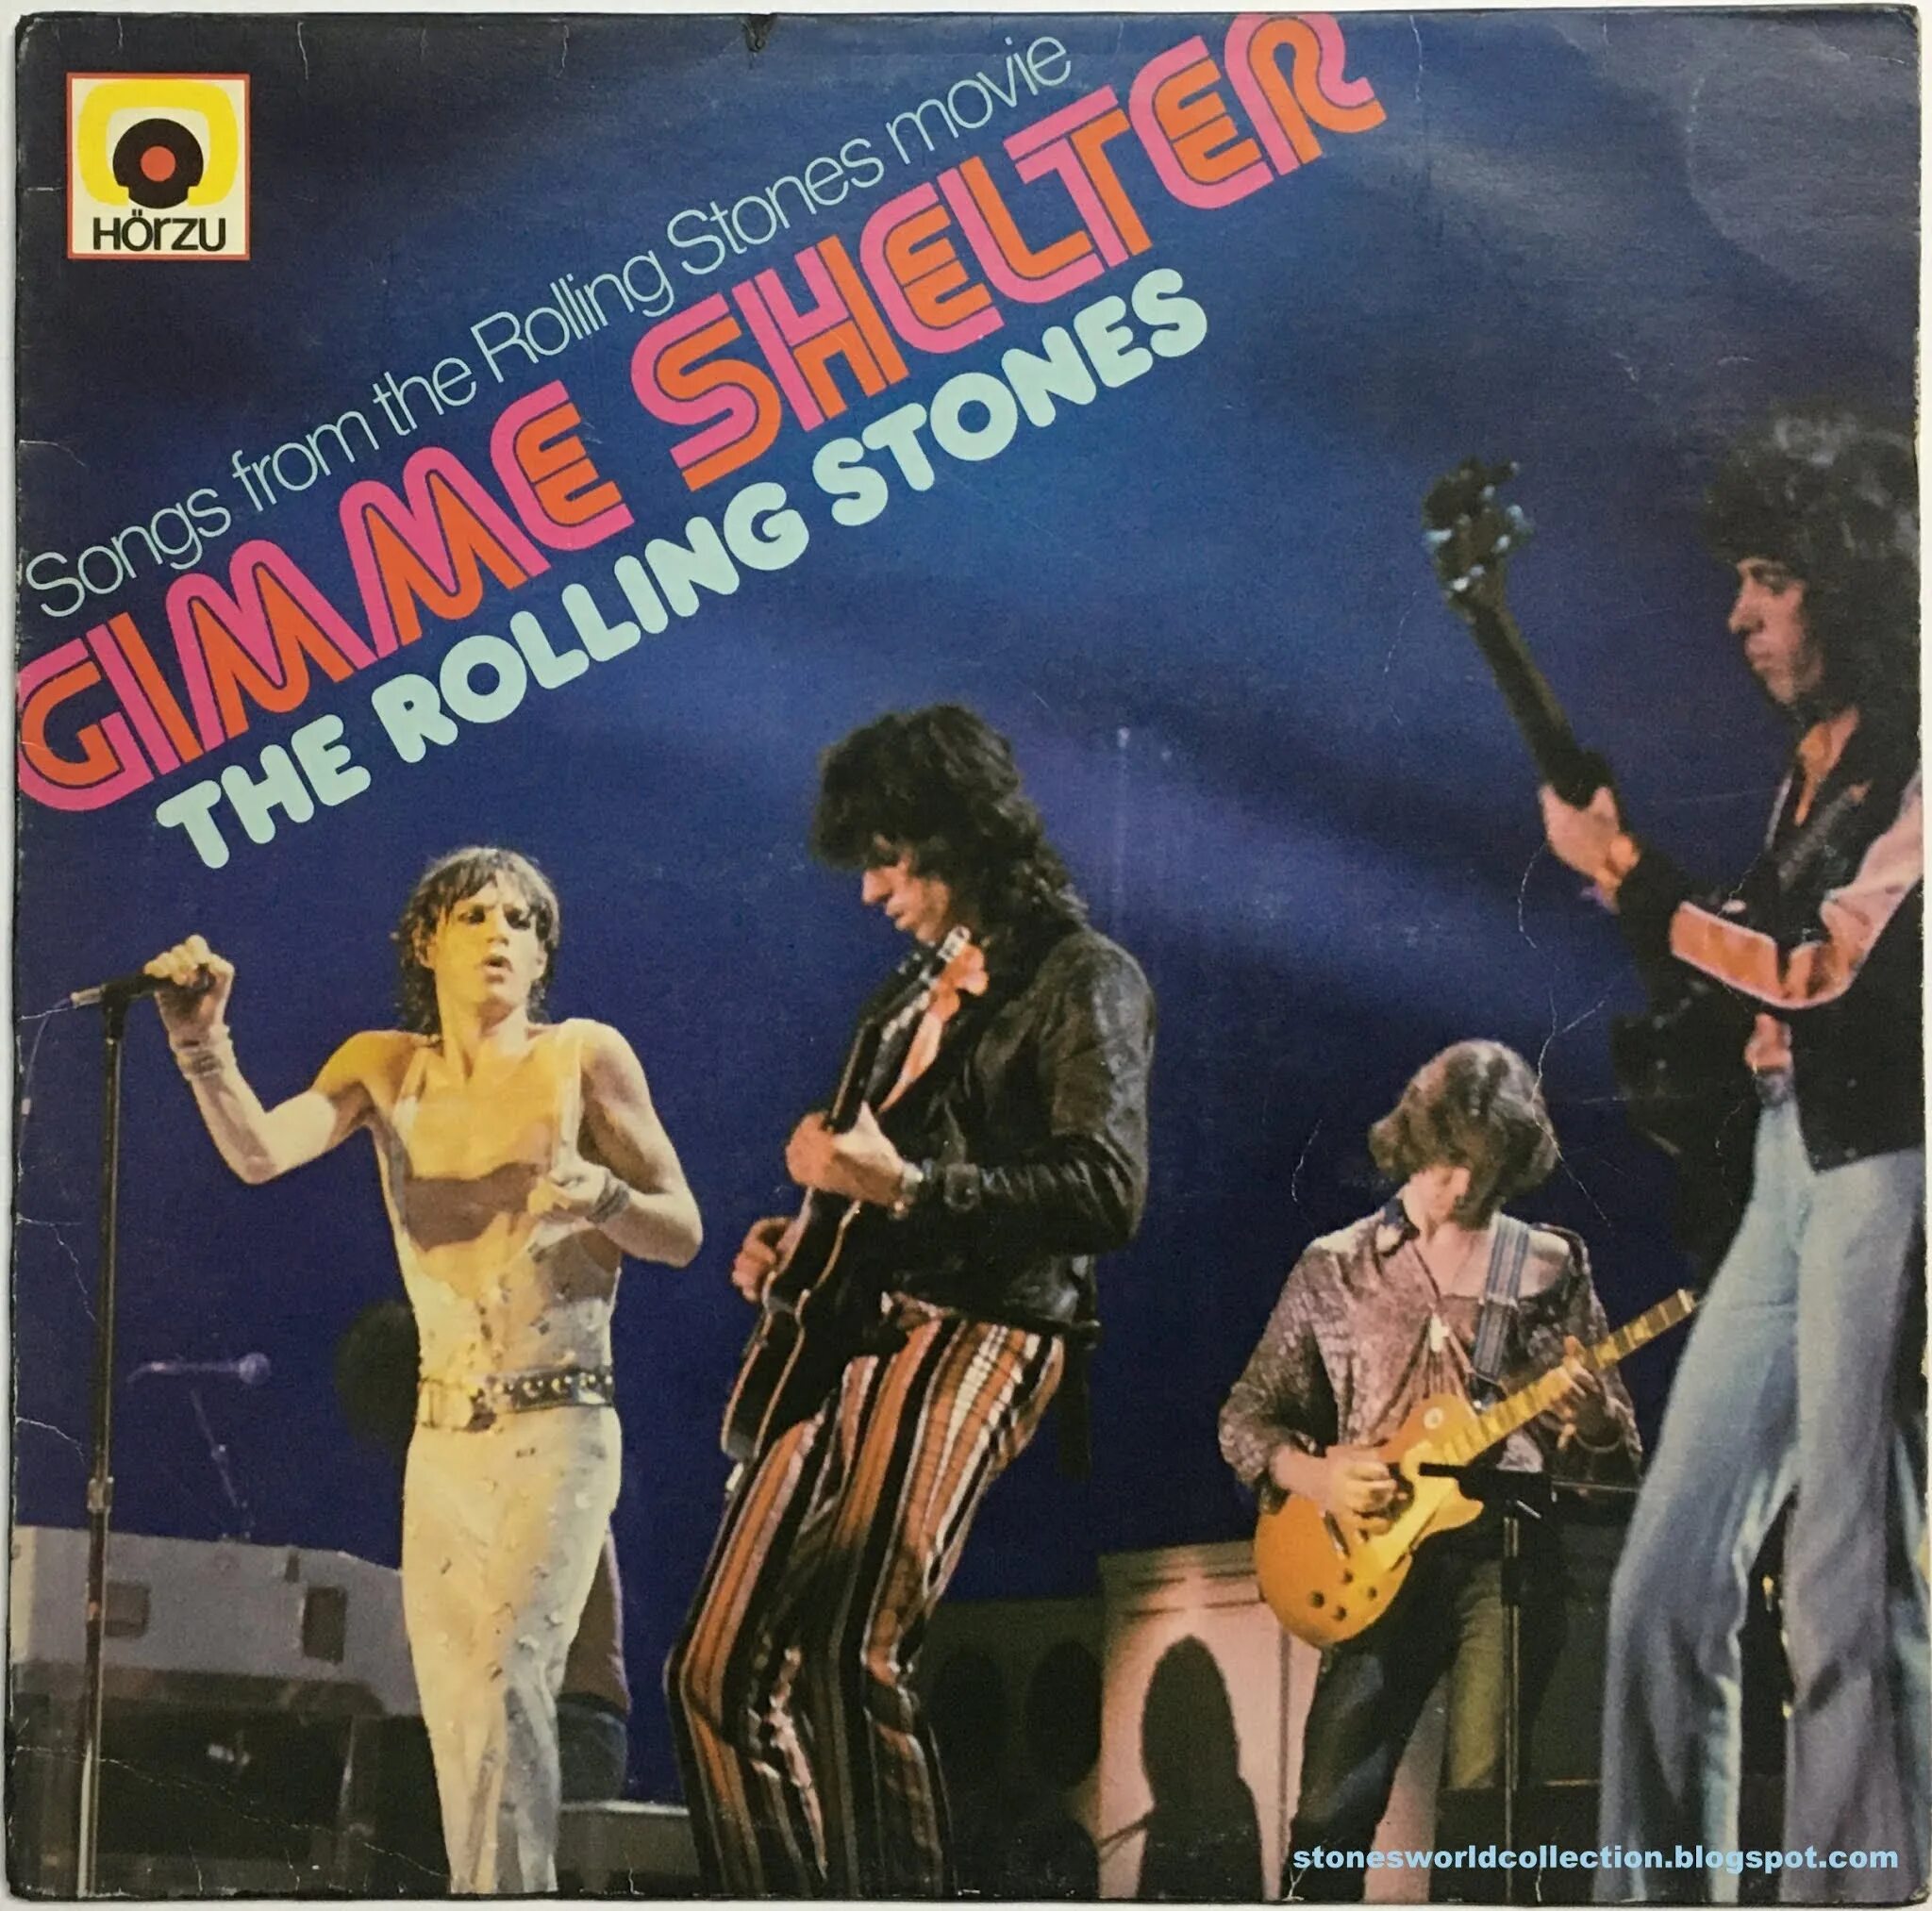 Rolling stones songs. Gimme Shelter 1970. Rolling Stones "Gimme Shelter". R̲olling S̲tones Gimme Shelter. The Rolling Stones Gimme Shelter обложка.